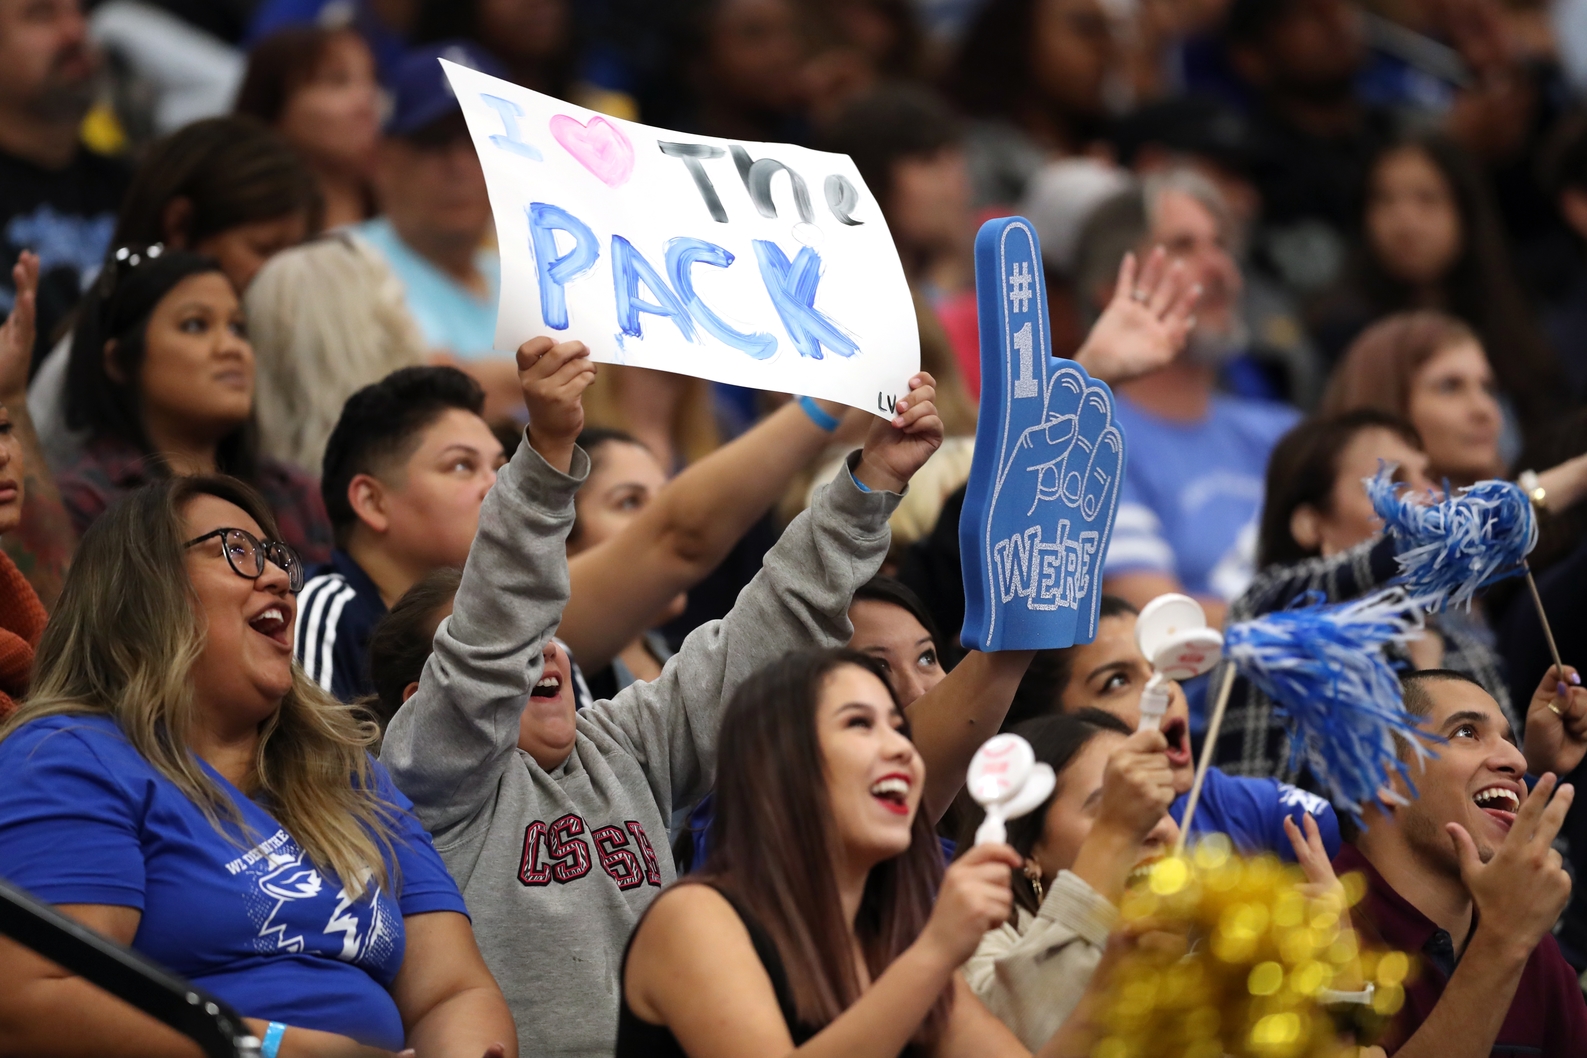 Student holding a "I Love CSUSB" sign